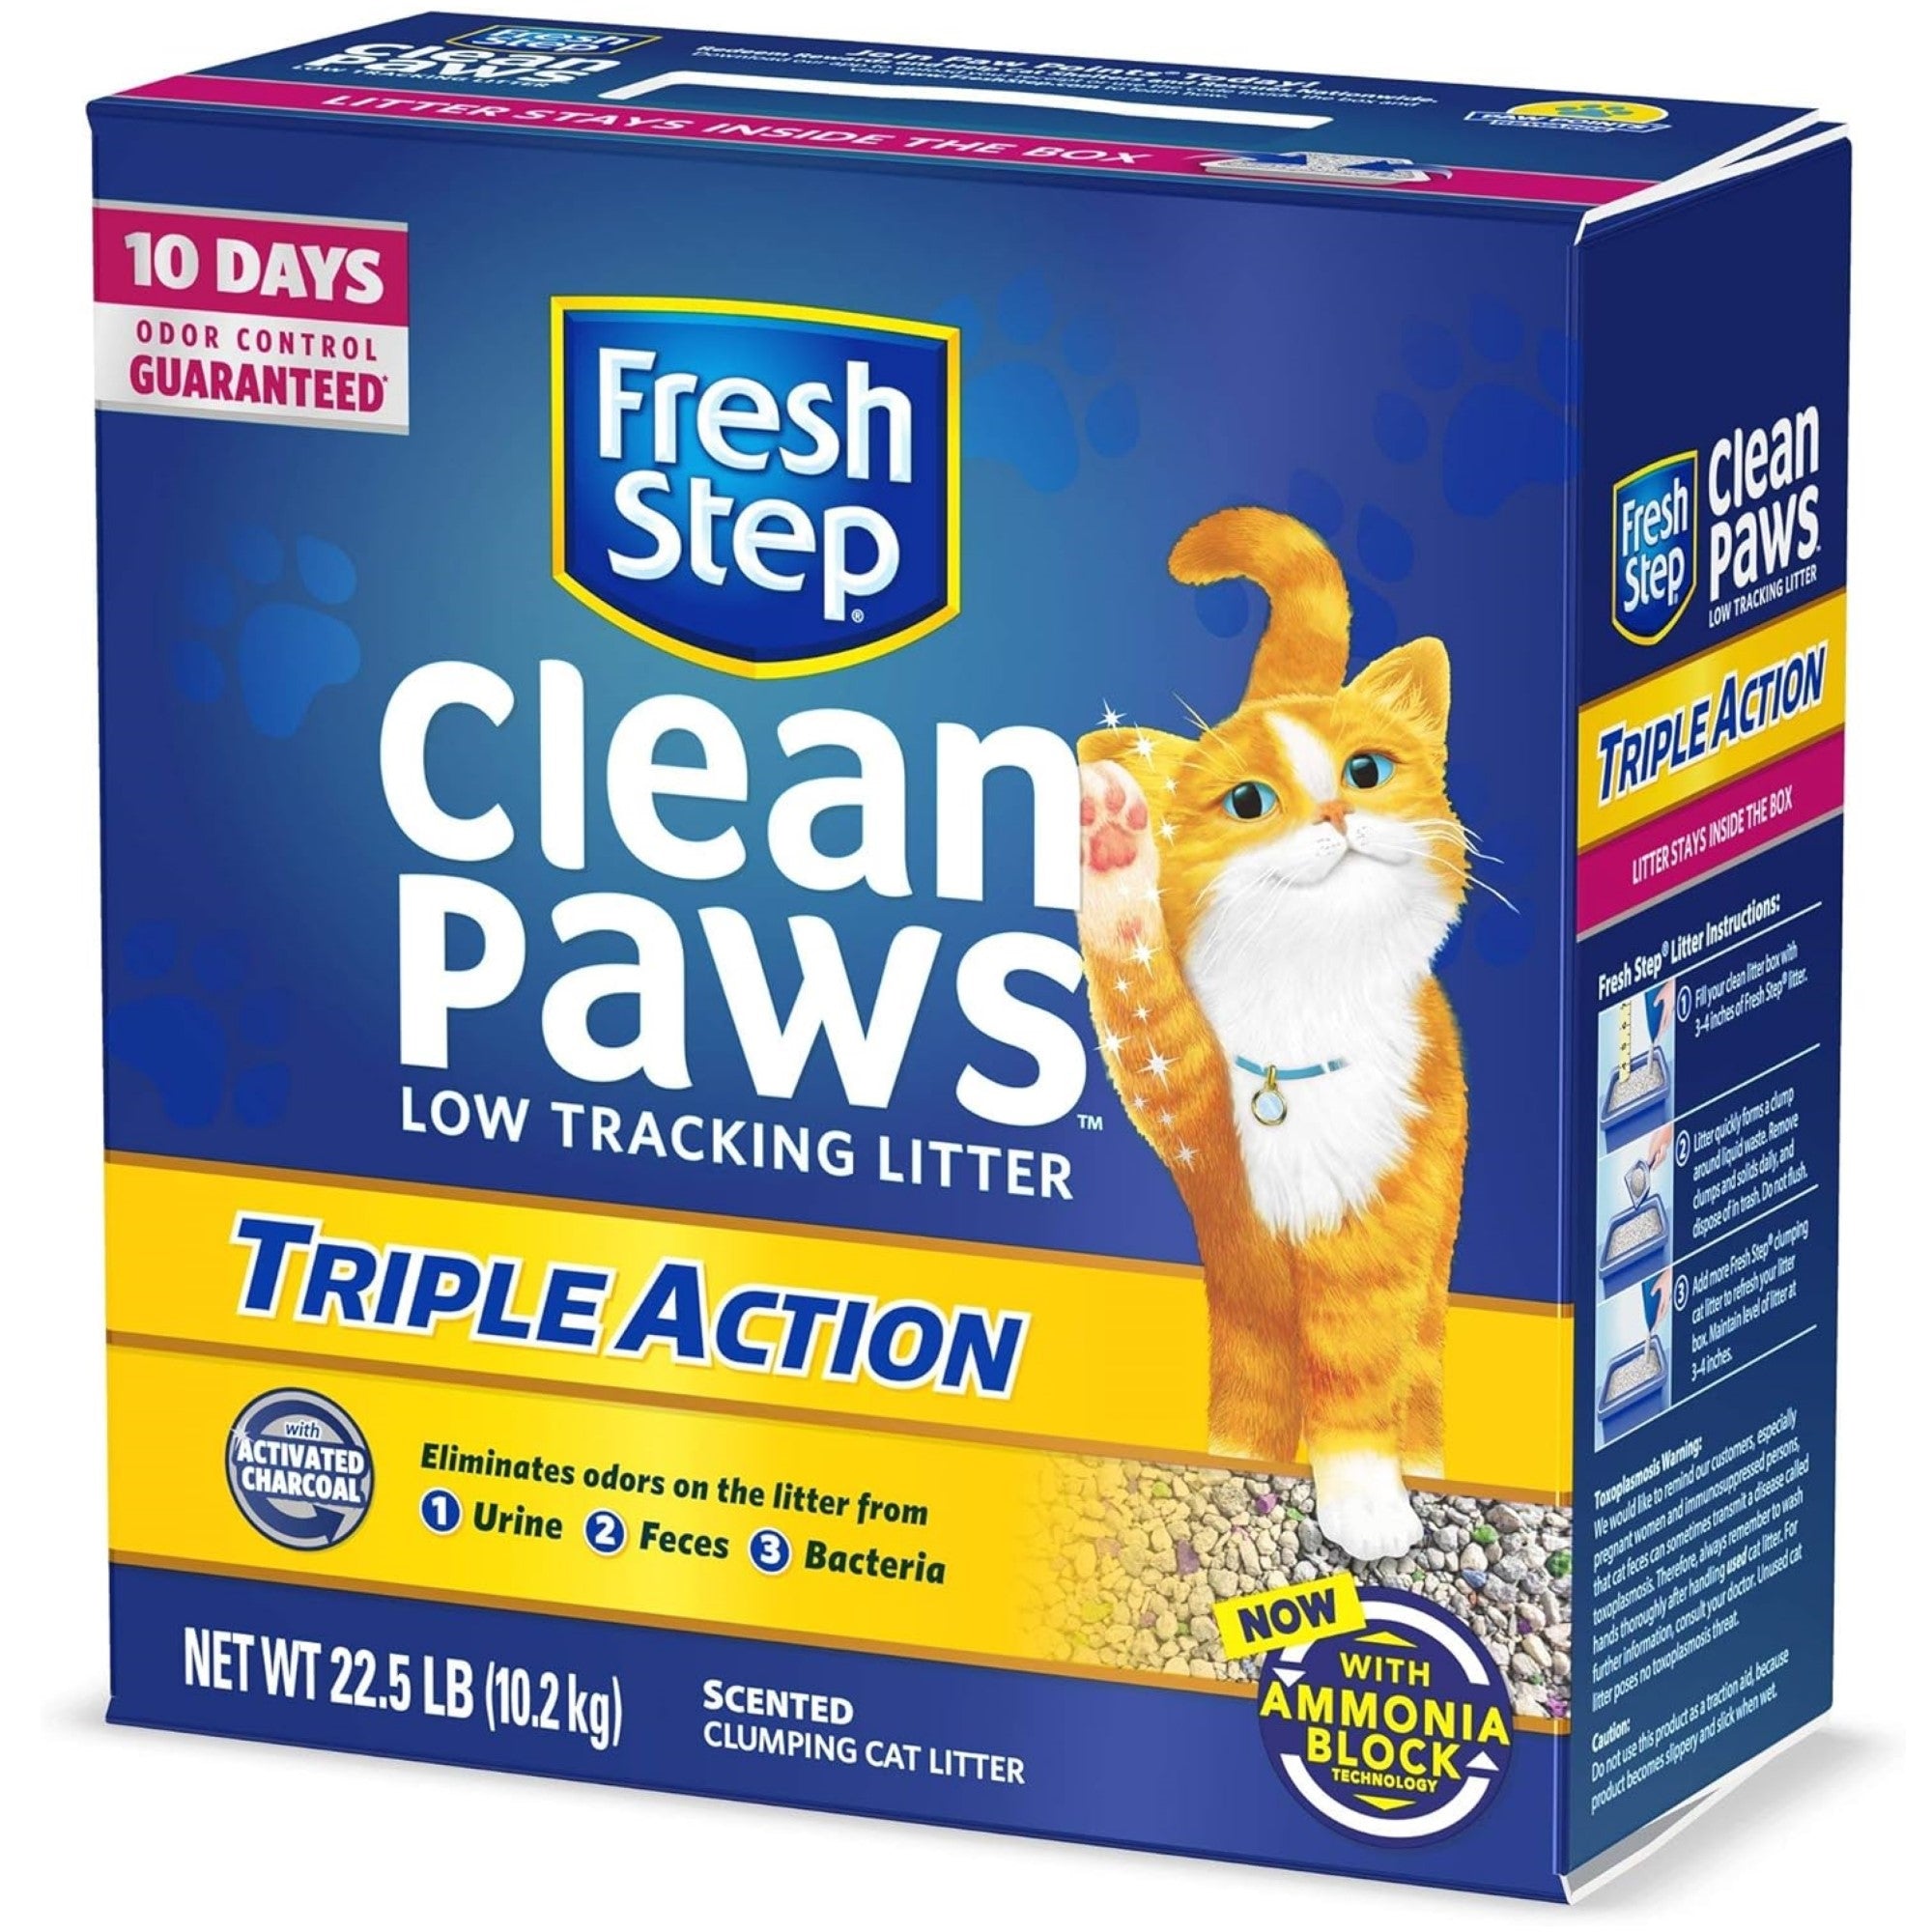 Fresh Step Clean Paws Triple Action Cat Litter, Low Tracking Litter, Scented, 22.5lb